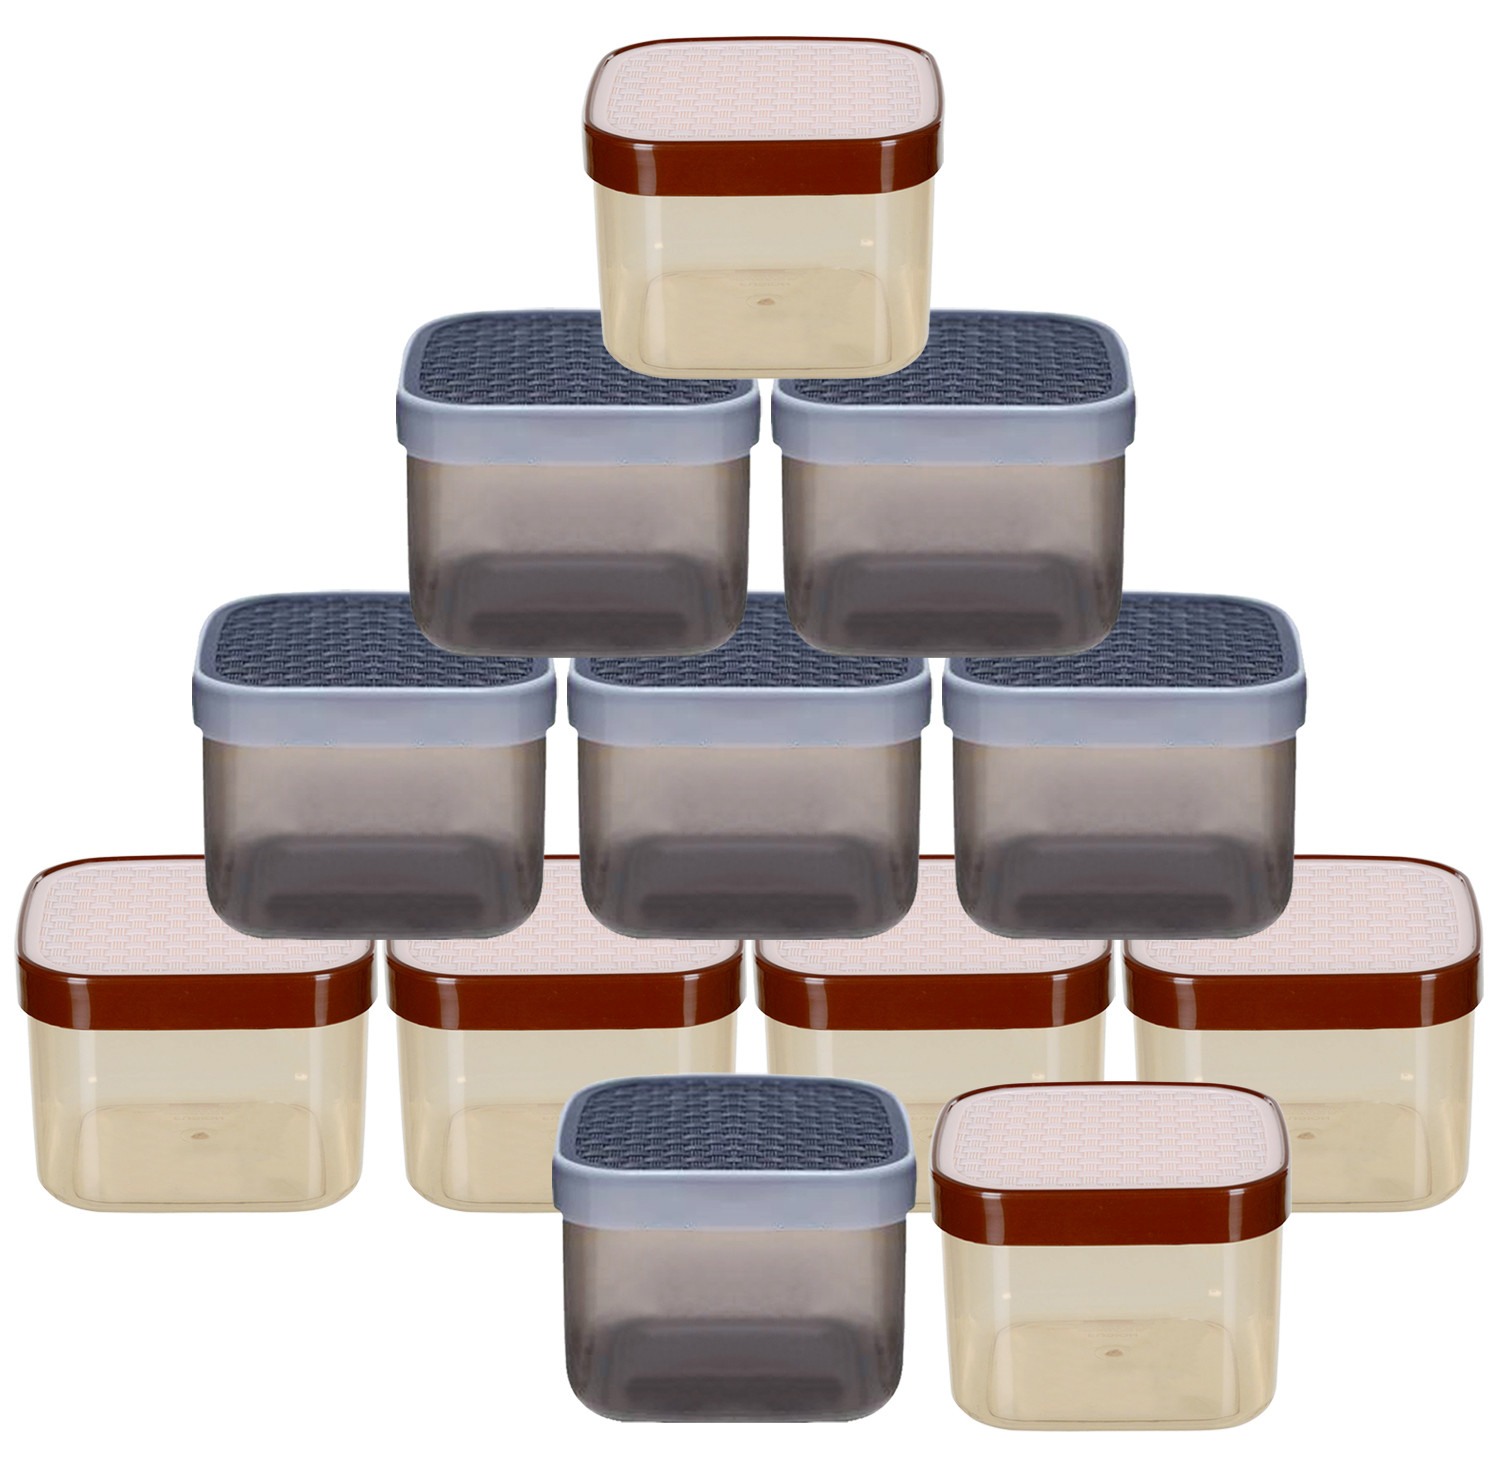 Kuber Industries Check Deisgn Lid  Multi Purpose Plastic Container,1200ml, Set of 12 (White & Grey)